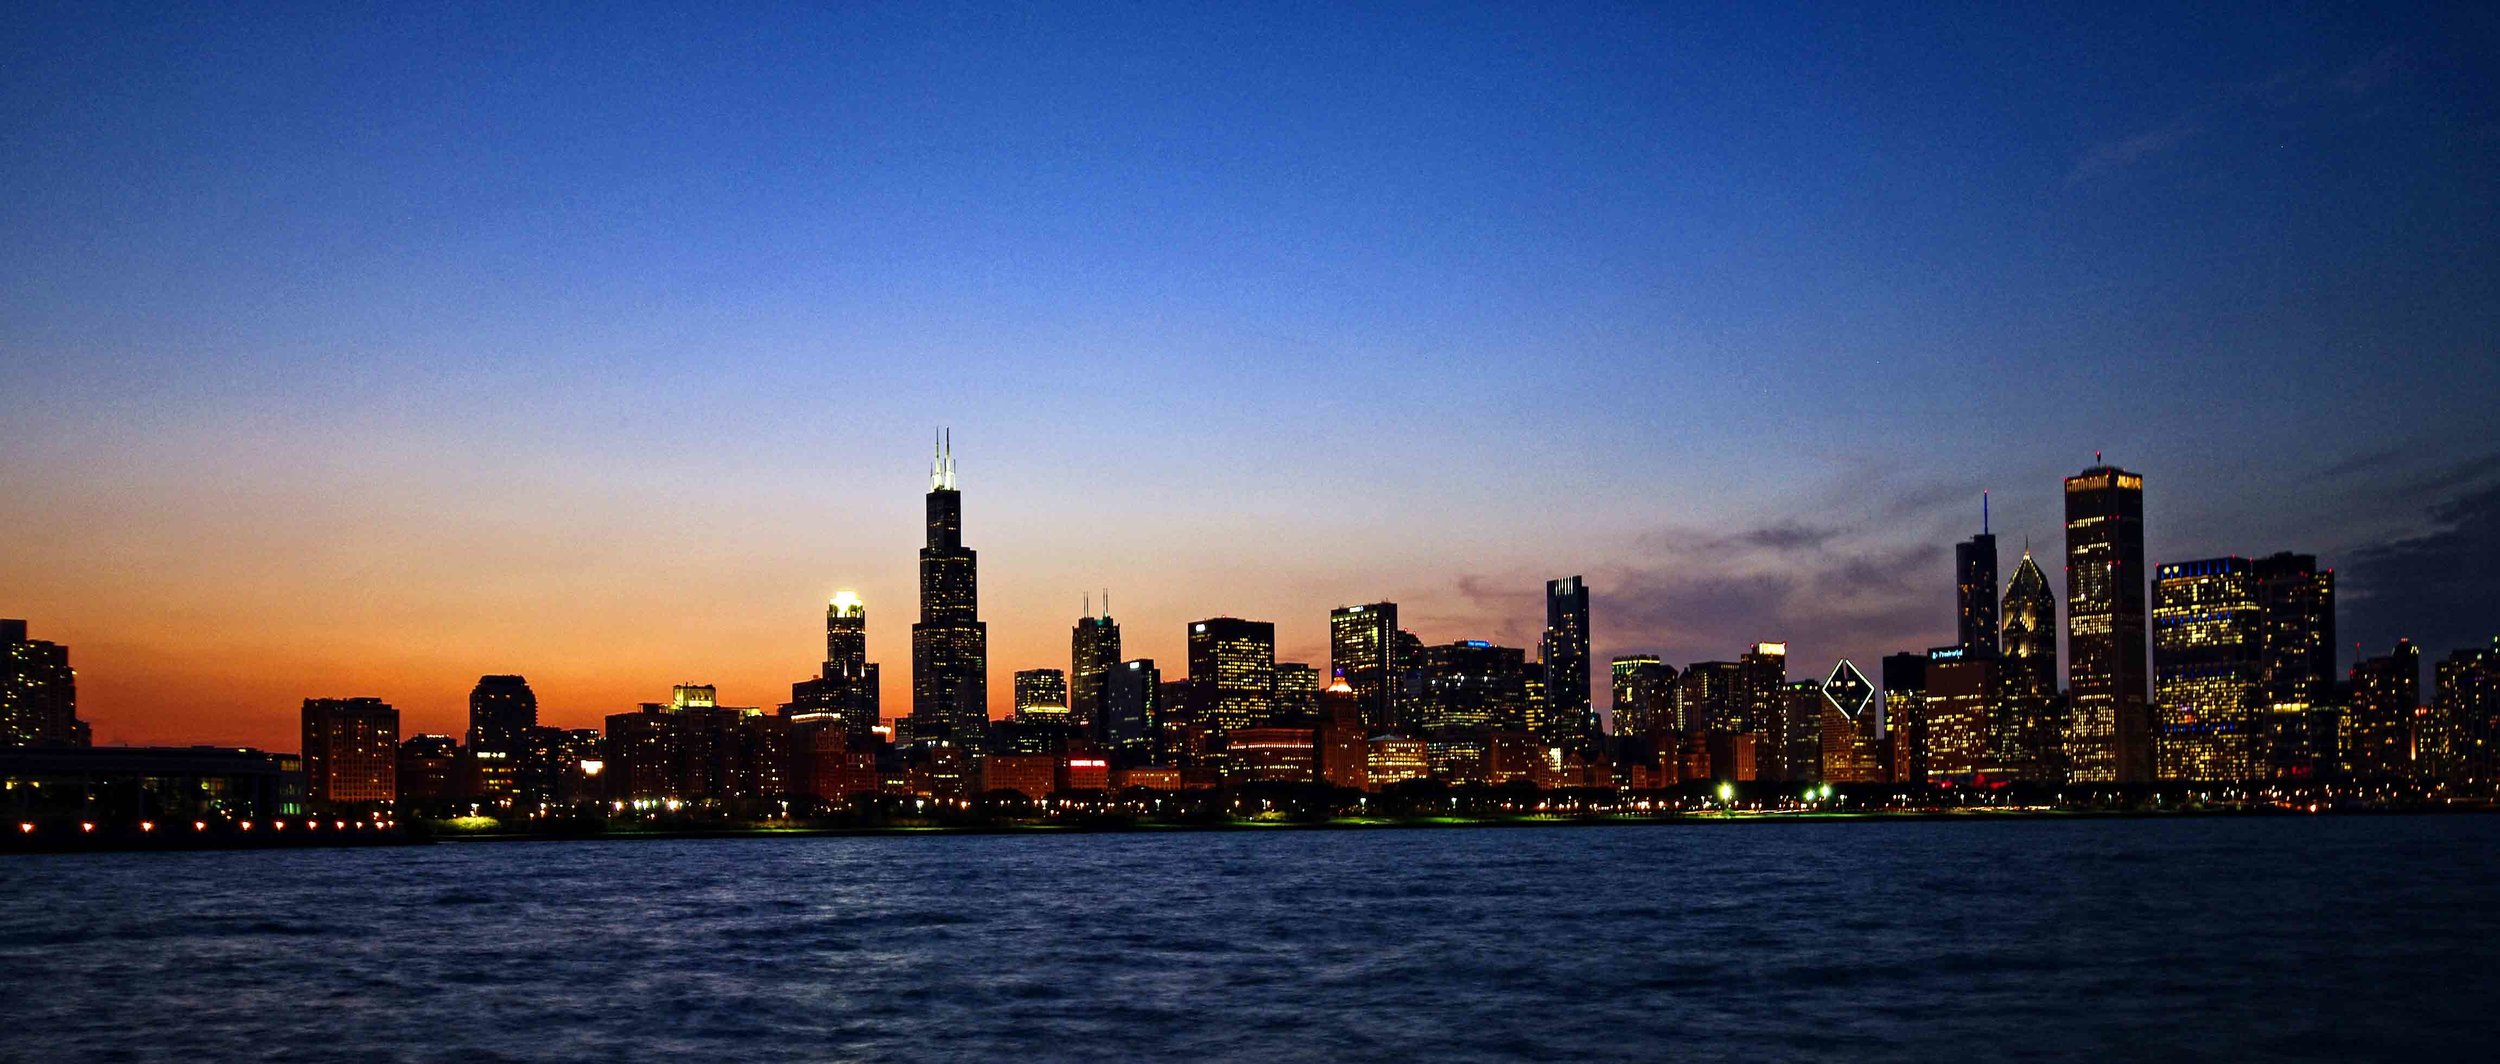 3rd place - Chicago Skyline - John Crowley